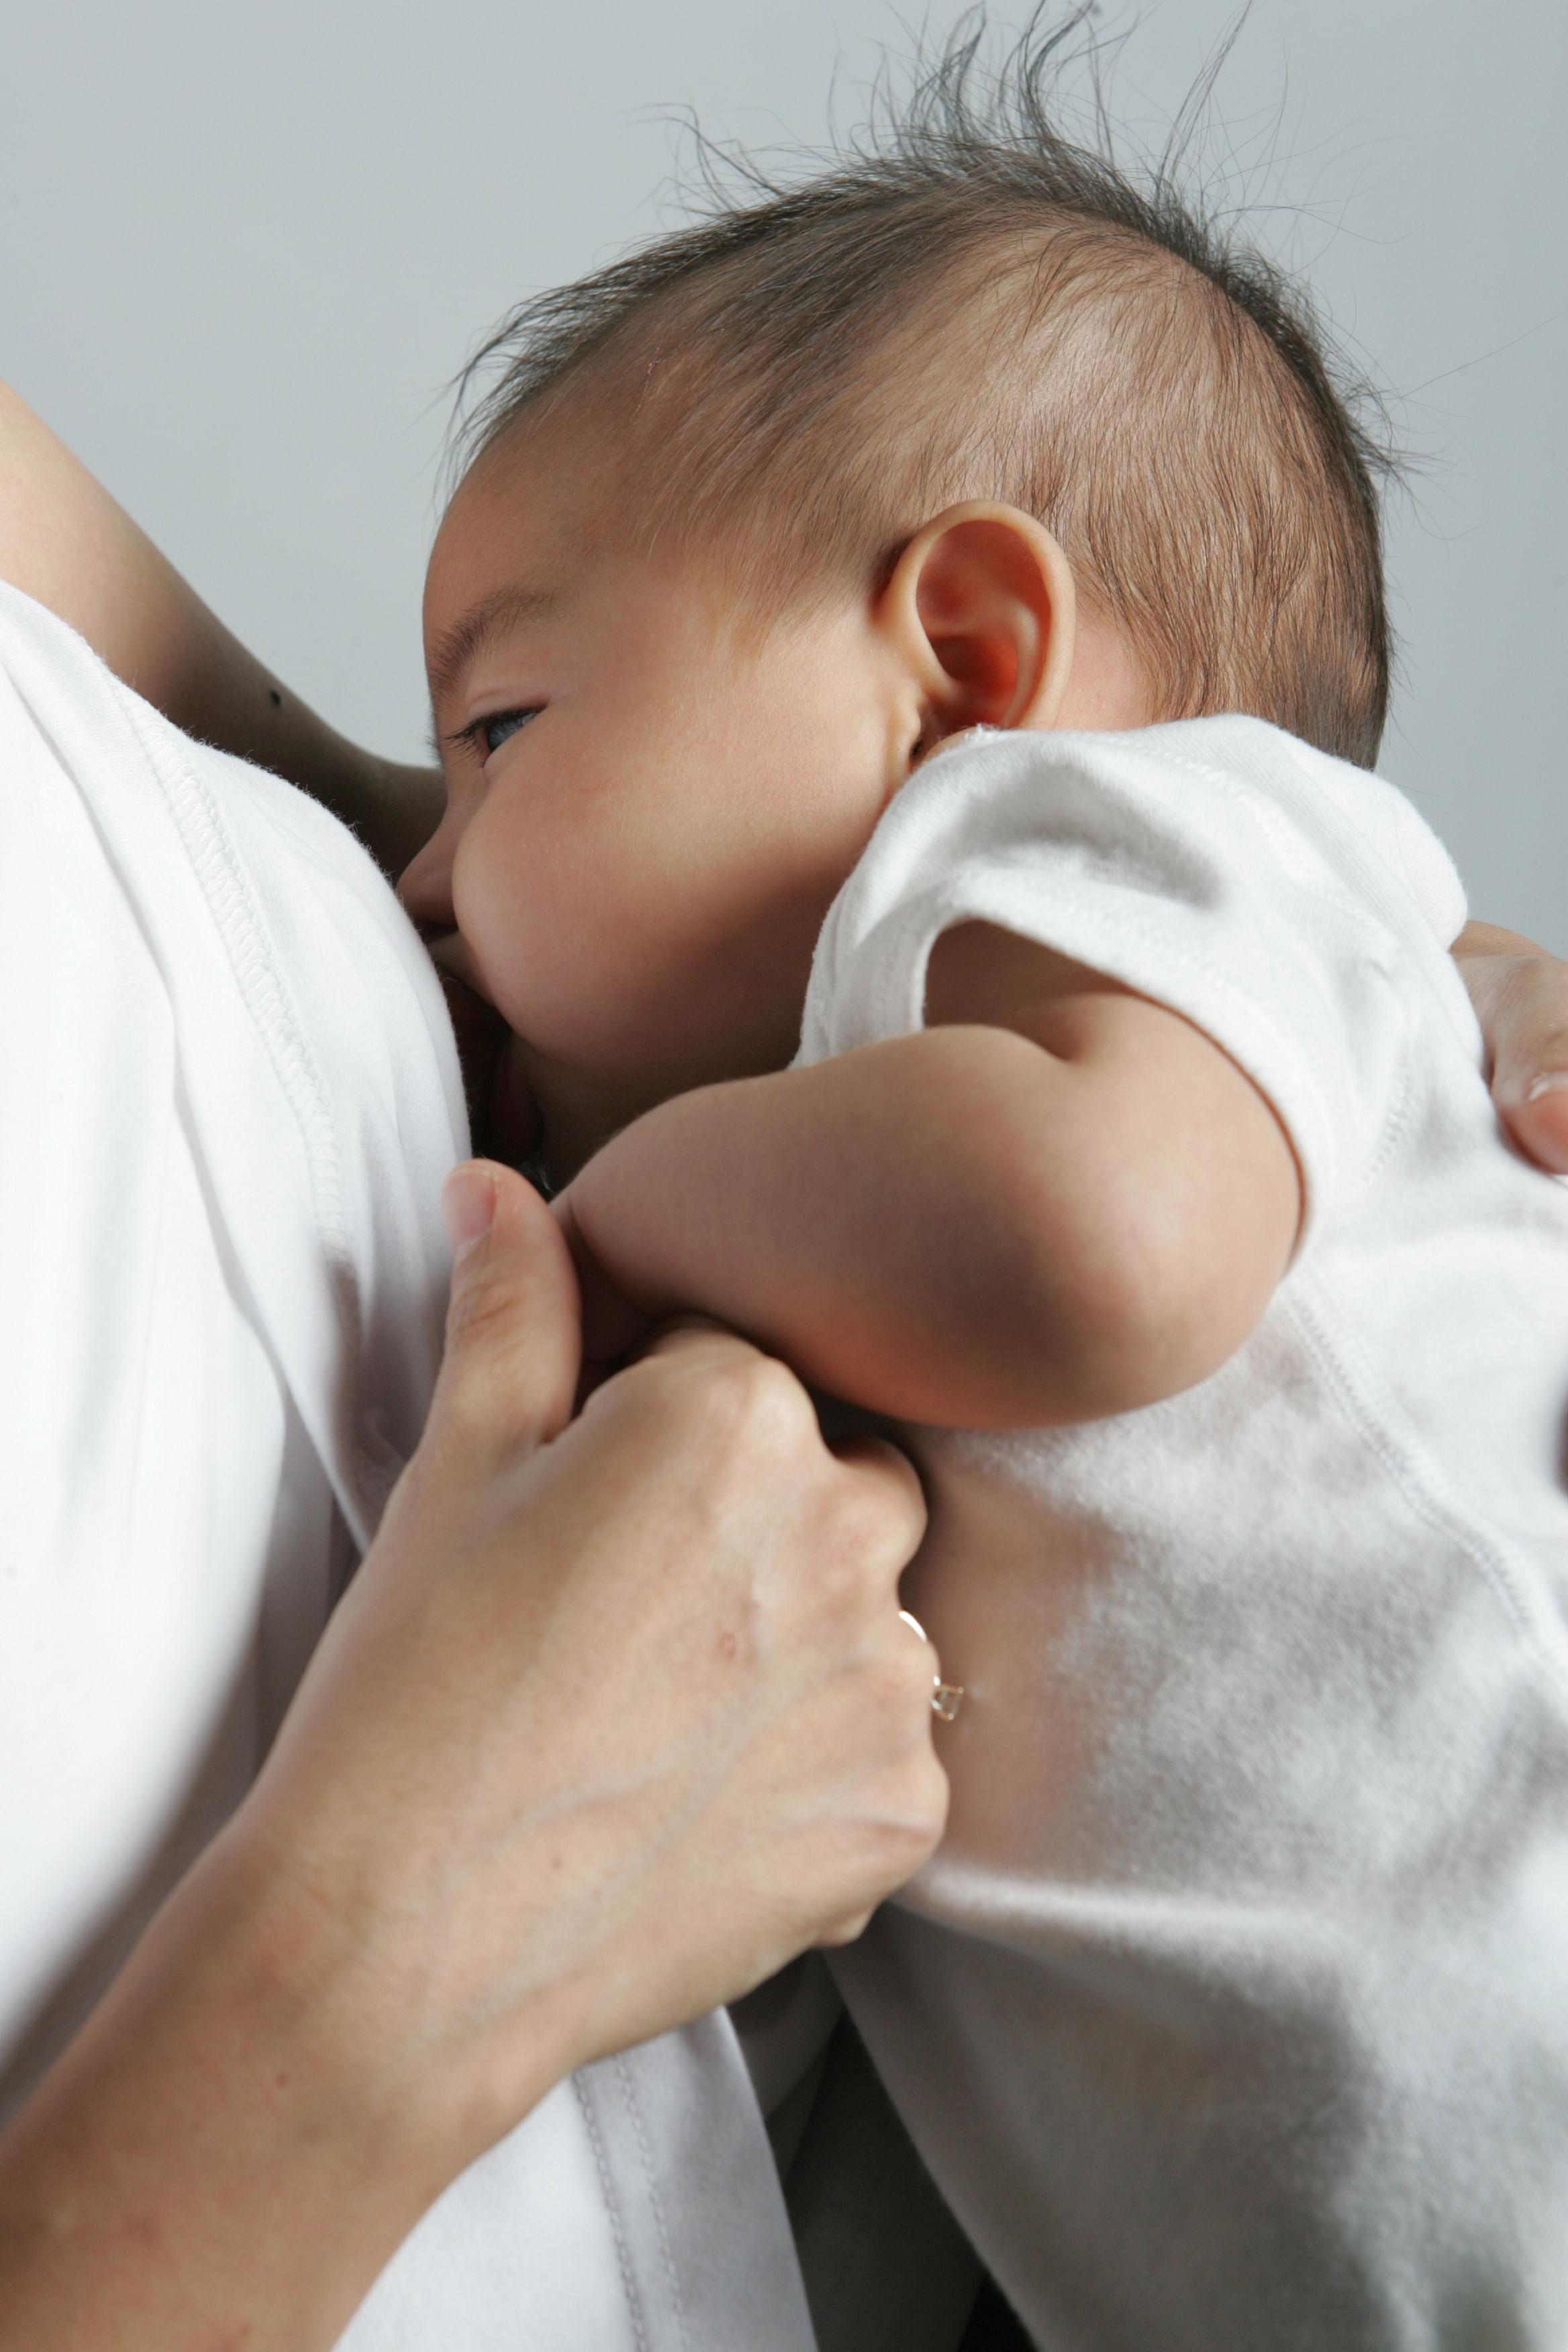 Women can reduce their chances of ovarian cancer by having more babies and breastfeeding them.